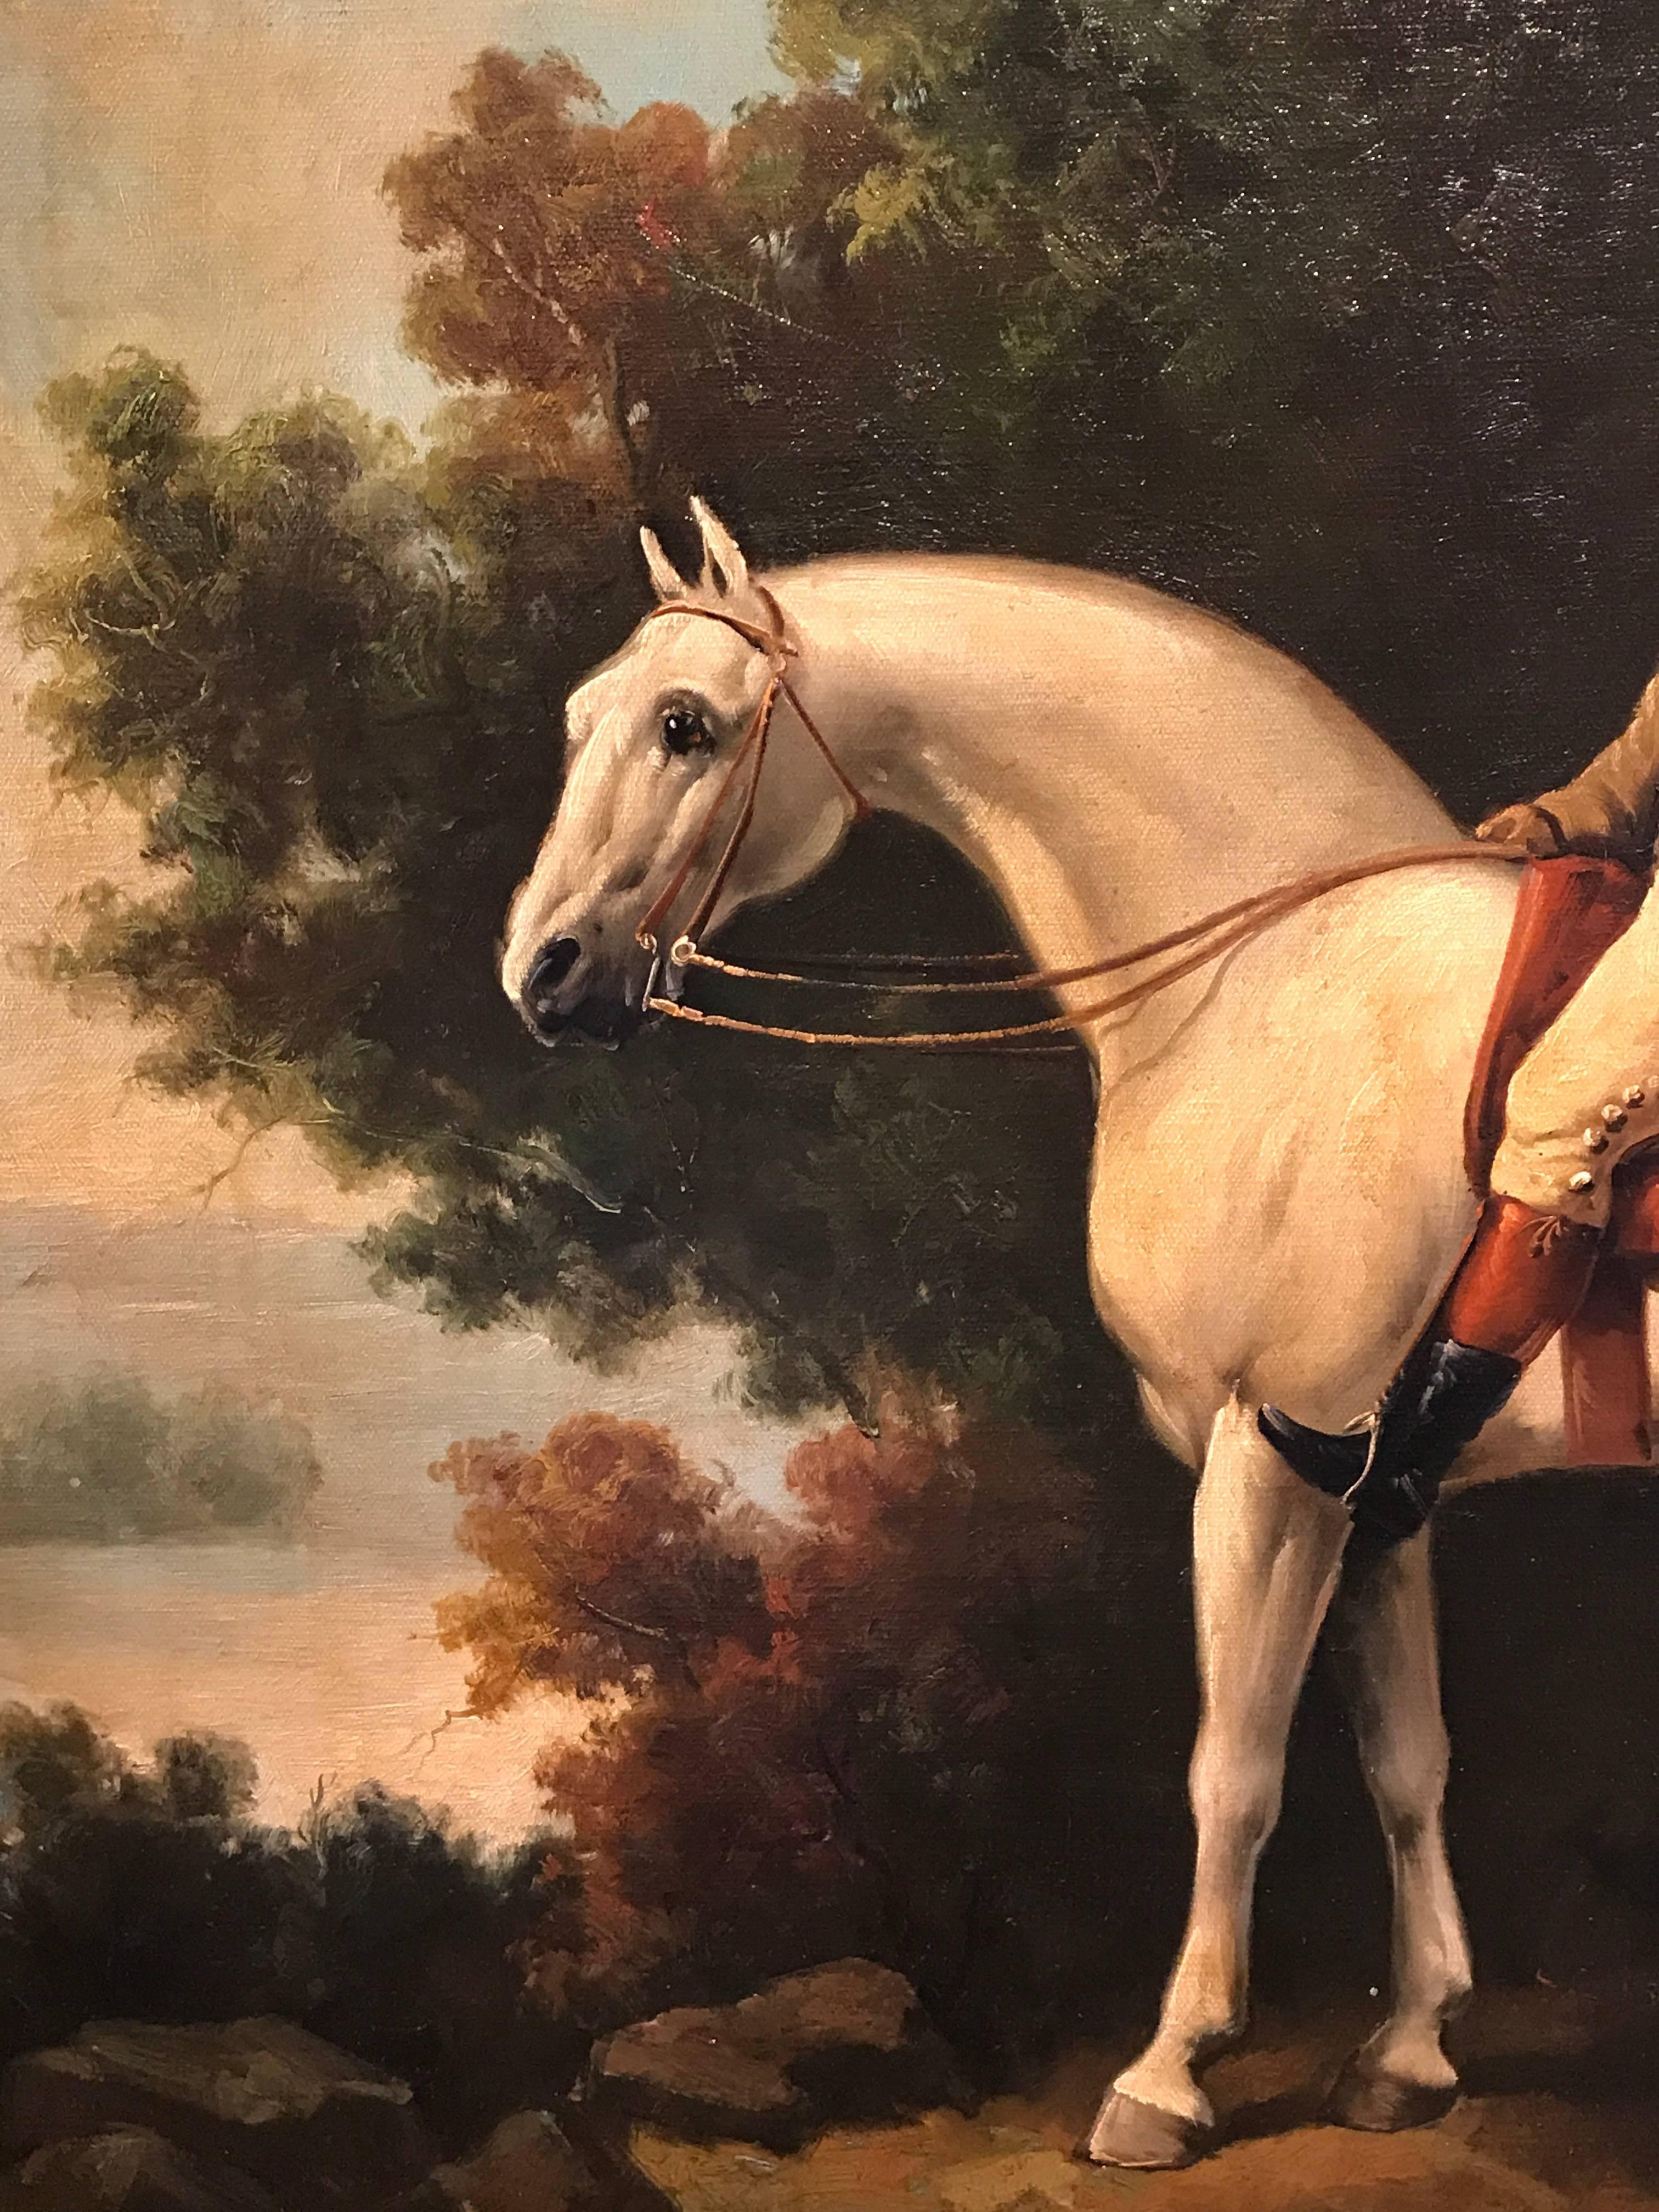 Very fine quality portrait of a gentleman seated on horseback. The painting is oil on canvas and signed by its artist to the lower right corner. 

The work is either based on an earlier work by George Stubbs or very much painted in that style.